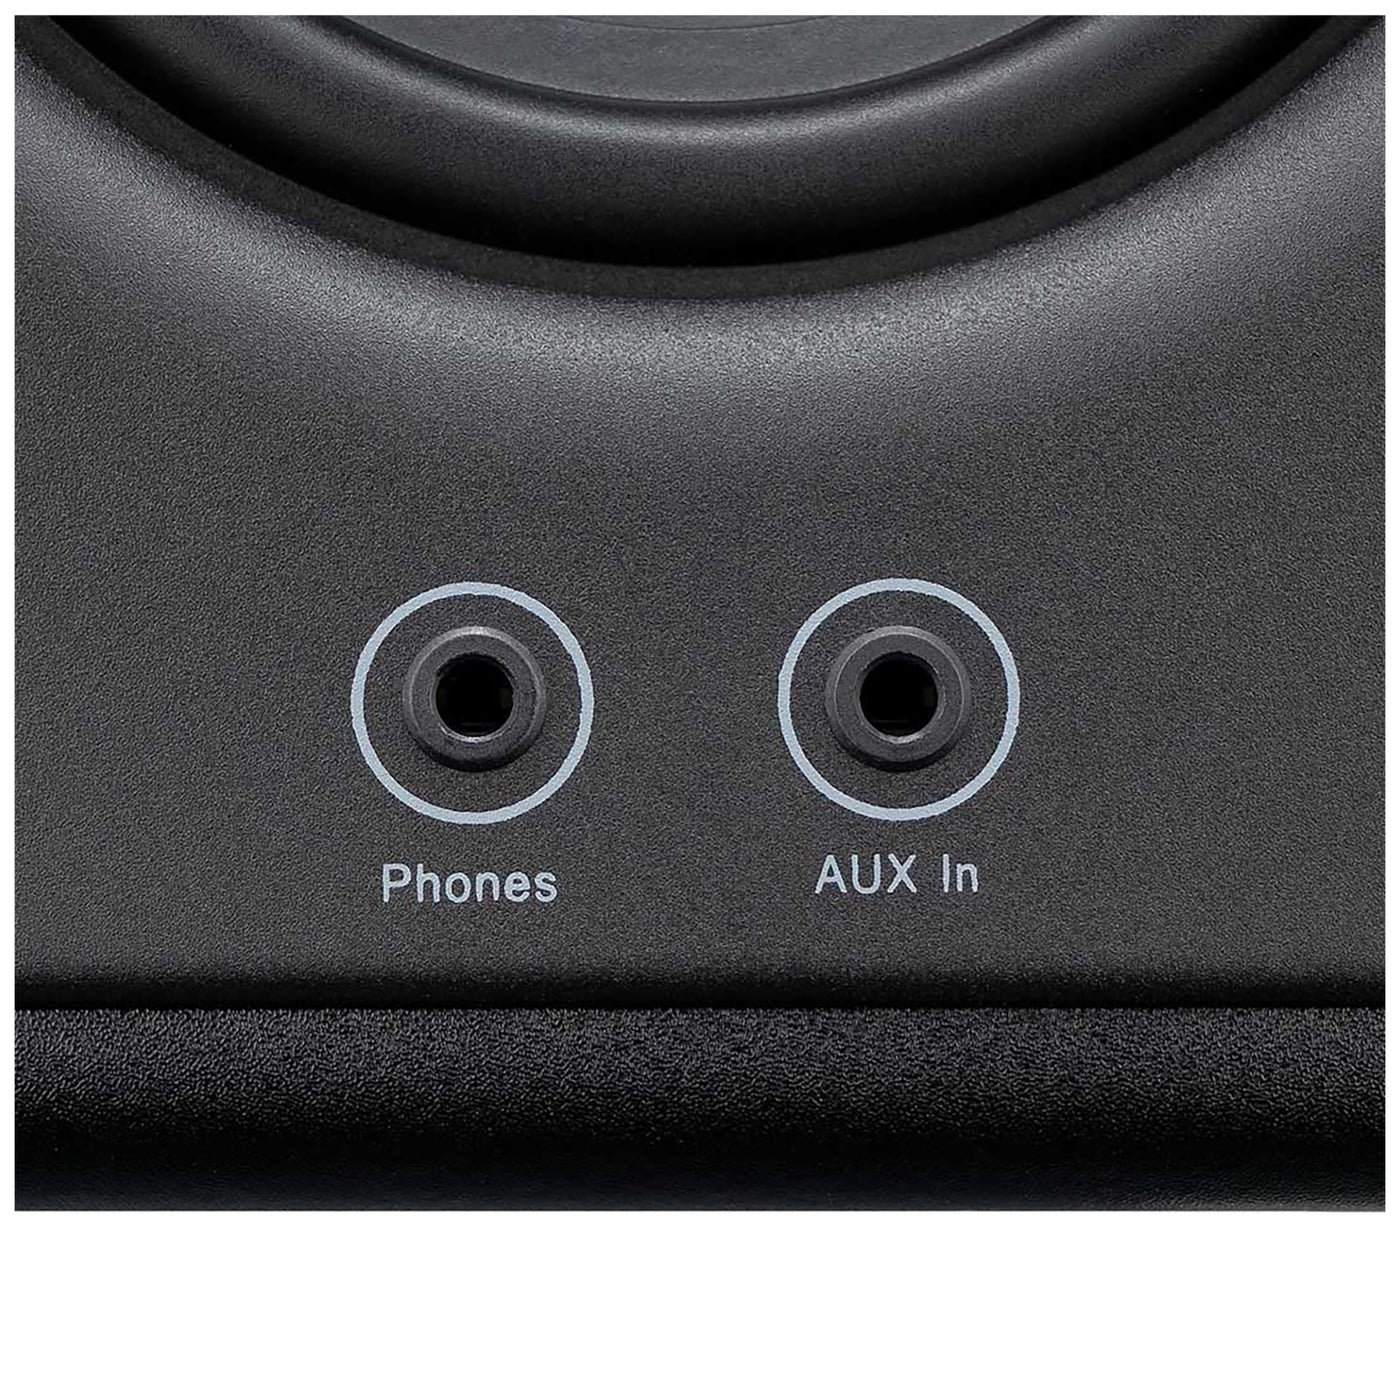 Fluid Audio F4 4" Powered Reference Monitors